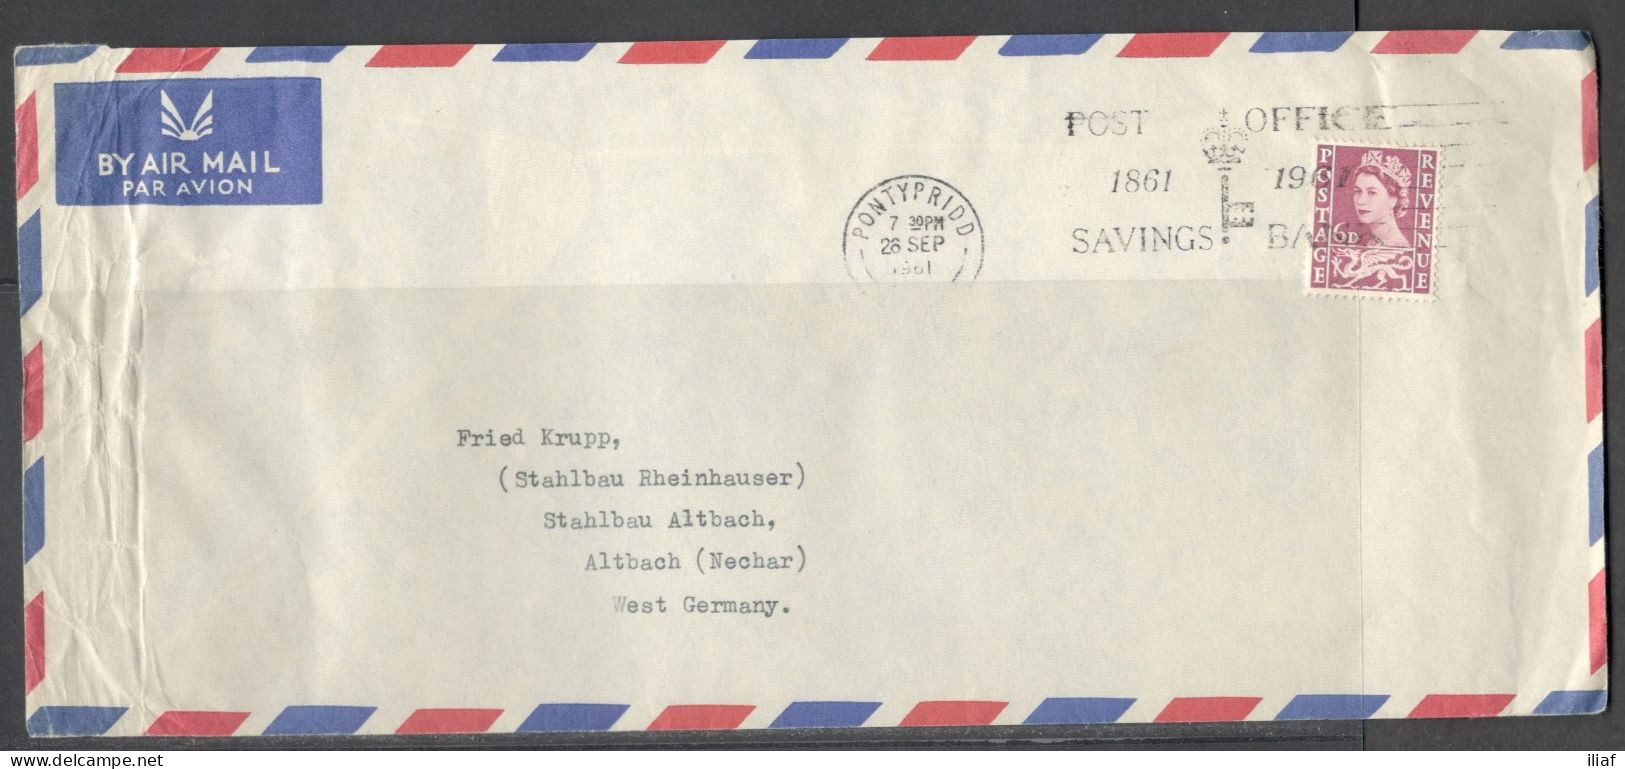 Great Britain - United Kingdom - Wales. Stamp Sc. W3 On Air Mail Letter, Sent From Pontypridd On 28.09.1961 To Germany - Pays De Galles